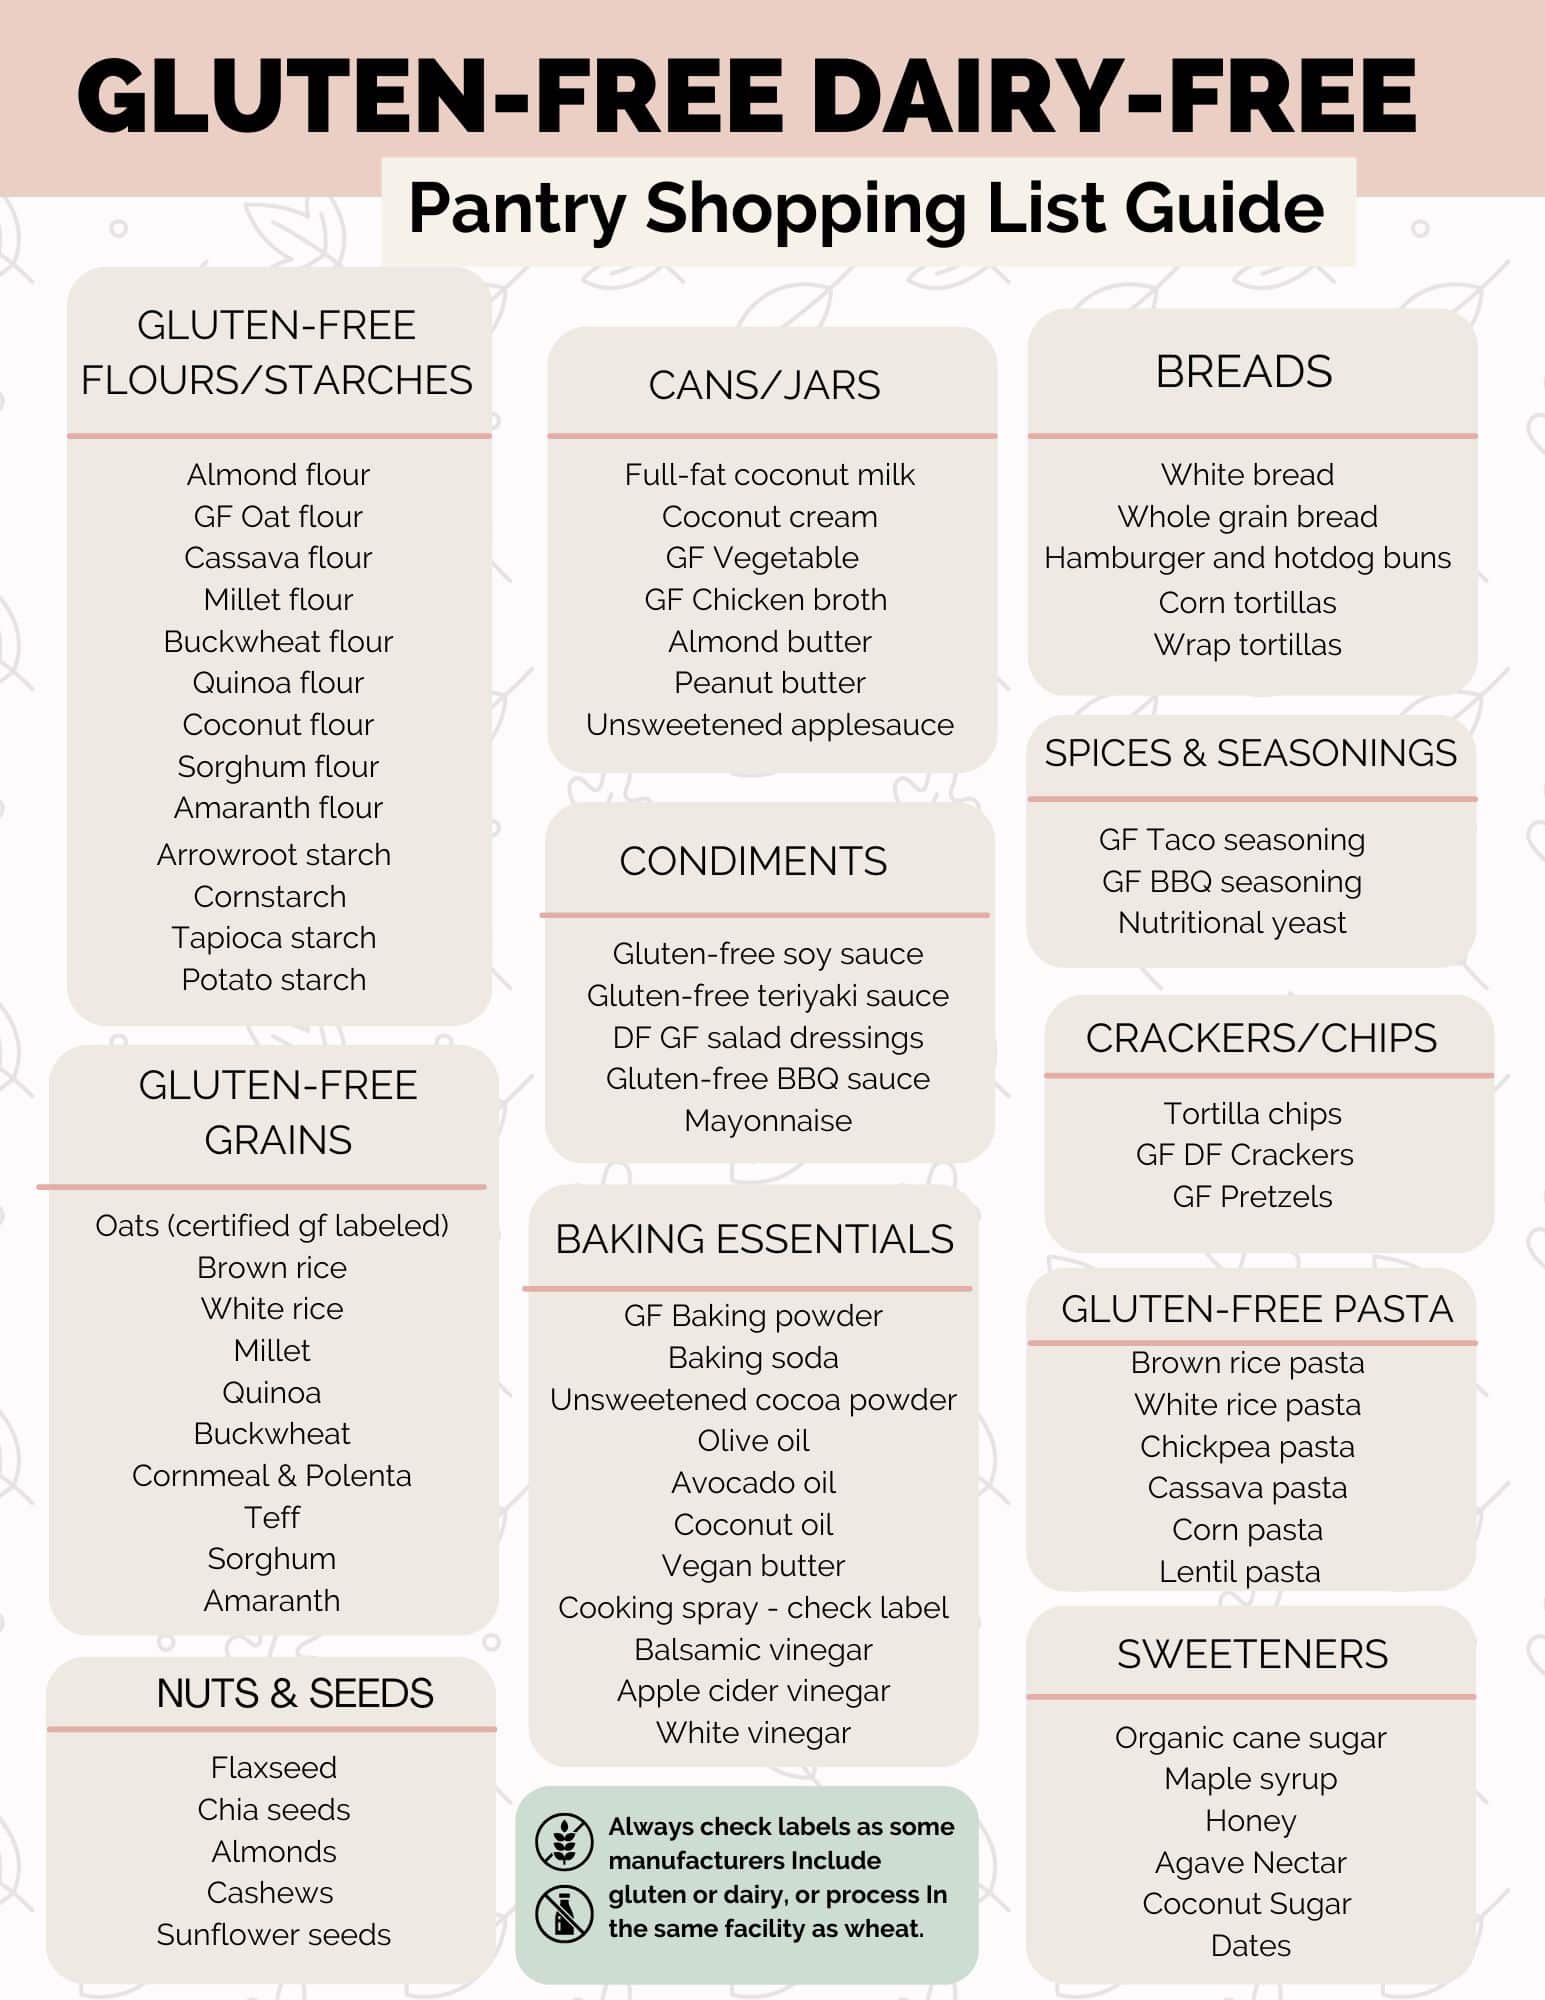 A shopping list for gluten-free dairy-free pantry food.